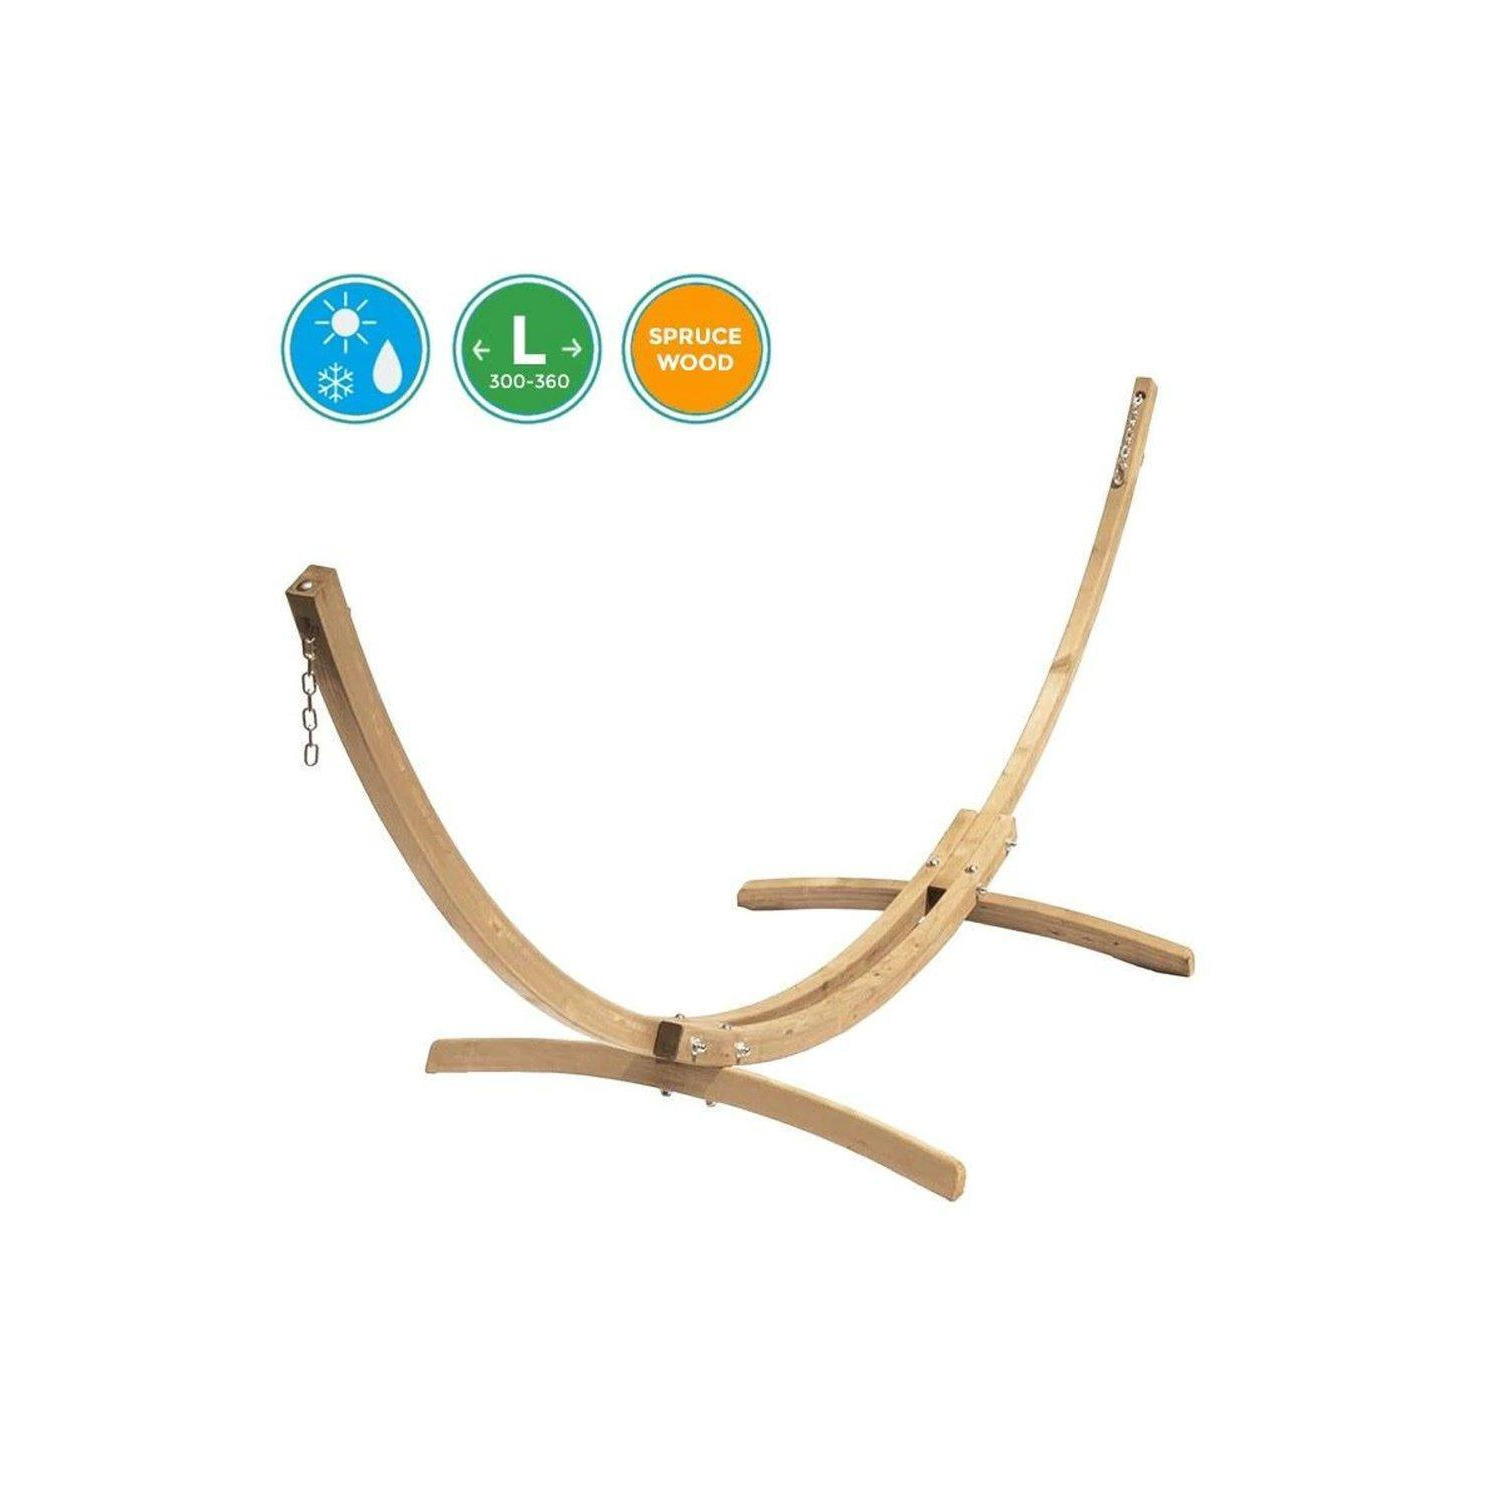 Olymp Large Wooden Hammock Stand (L) Fits Hammocks With Length 310-365 cm - image 1